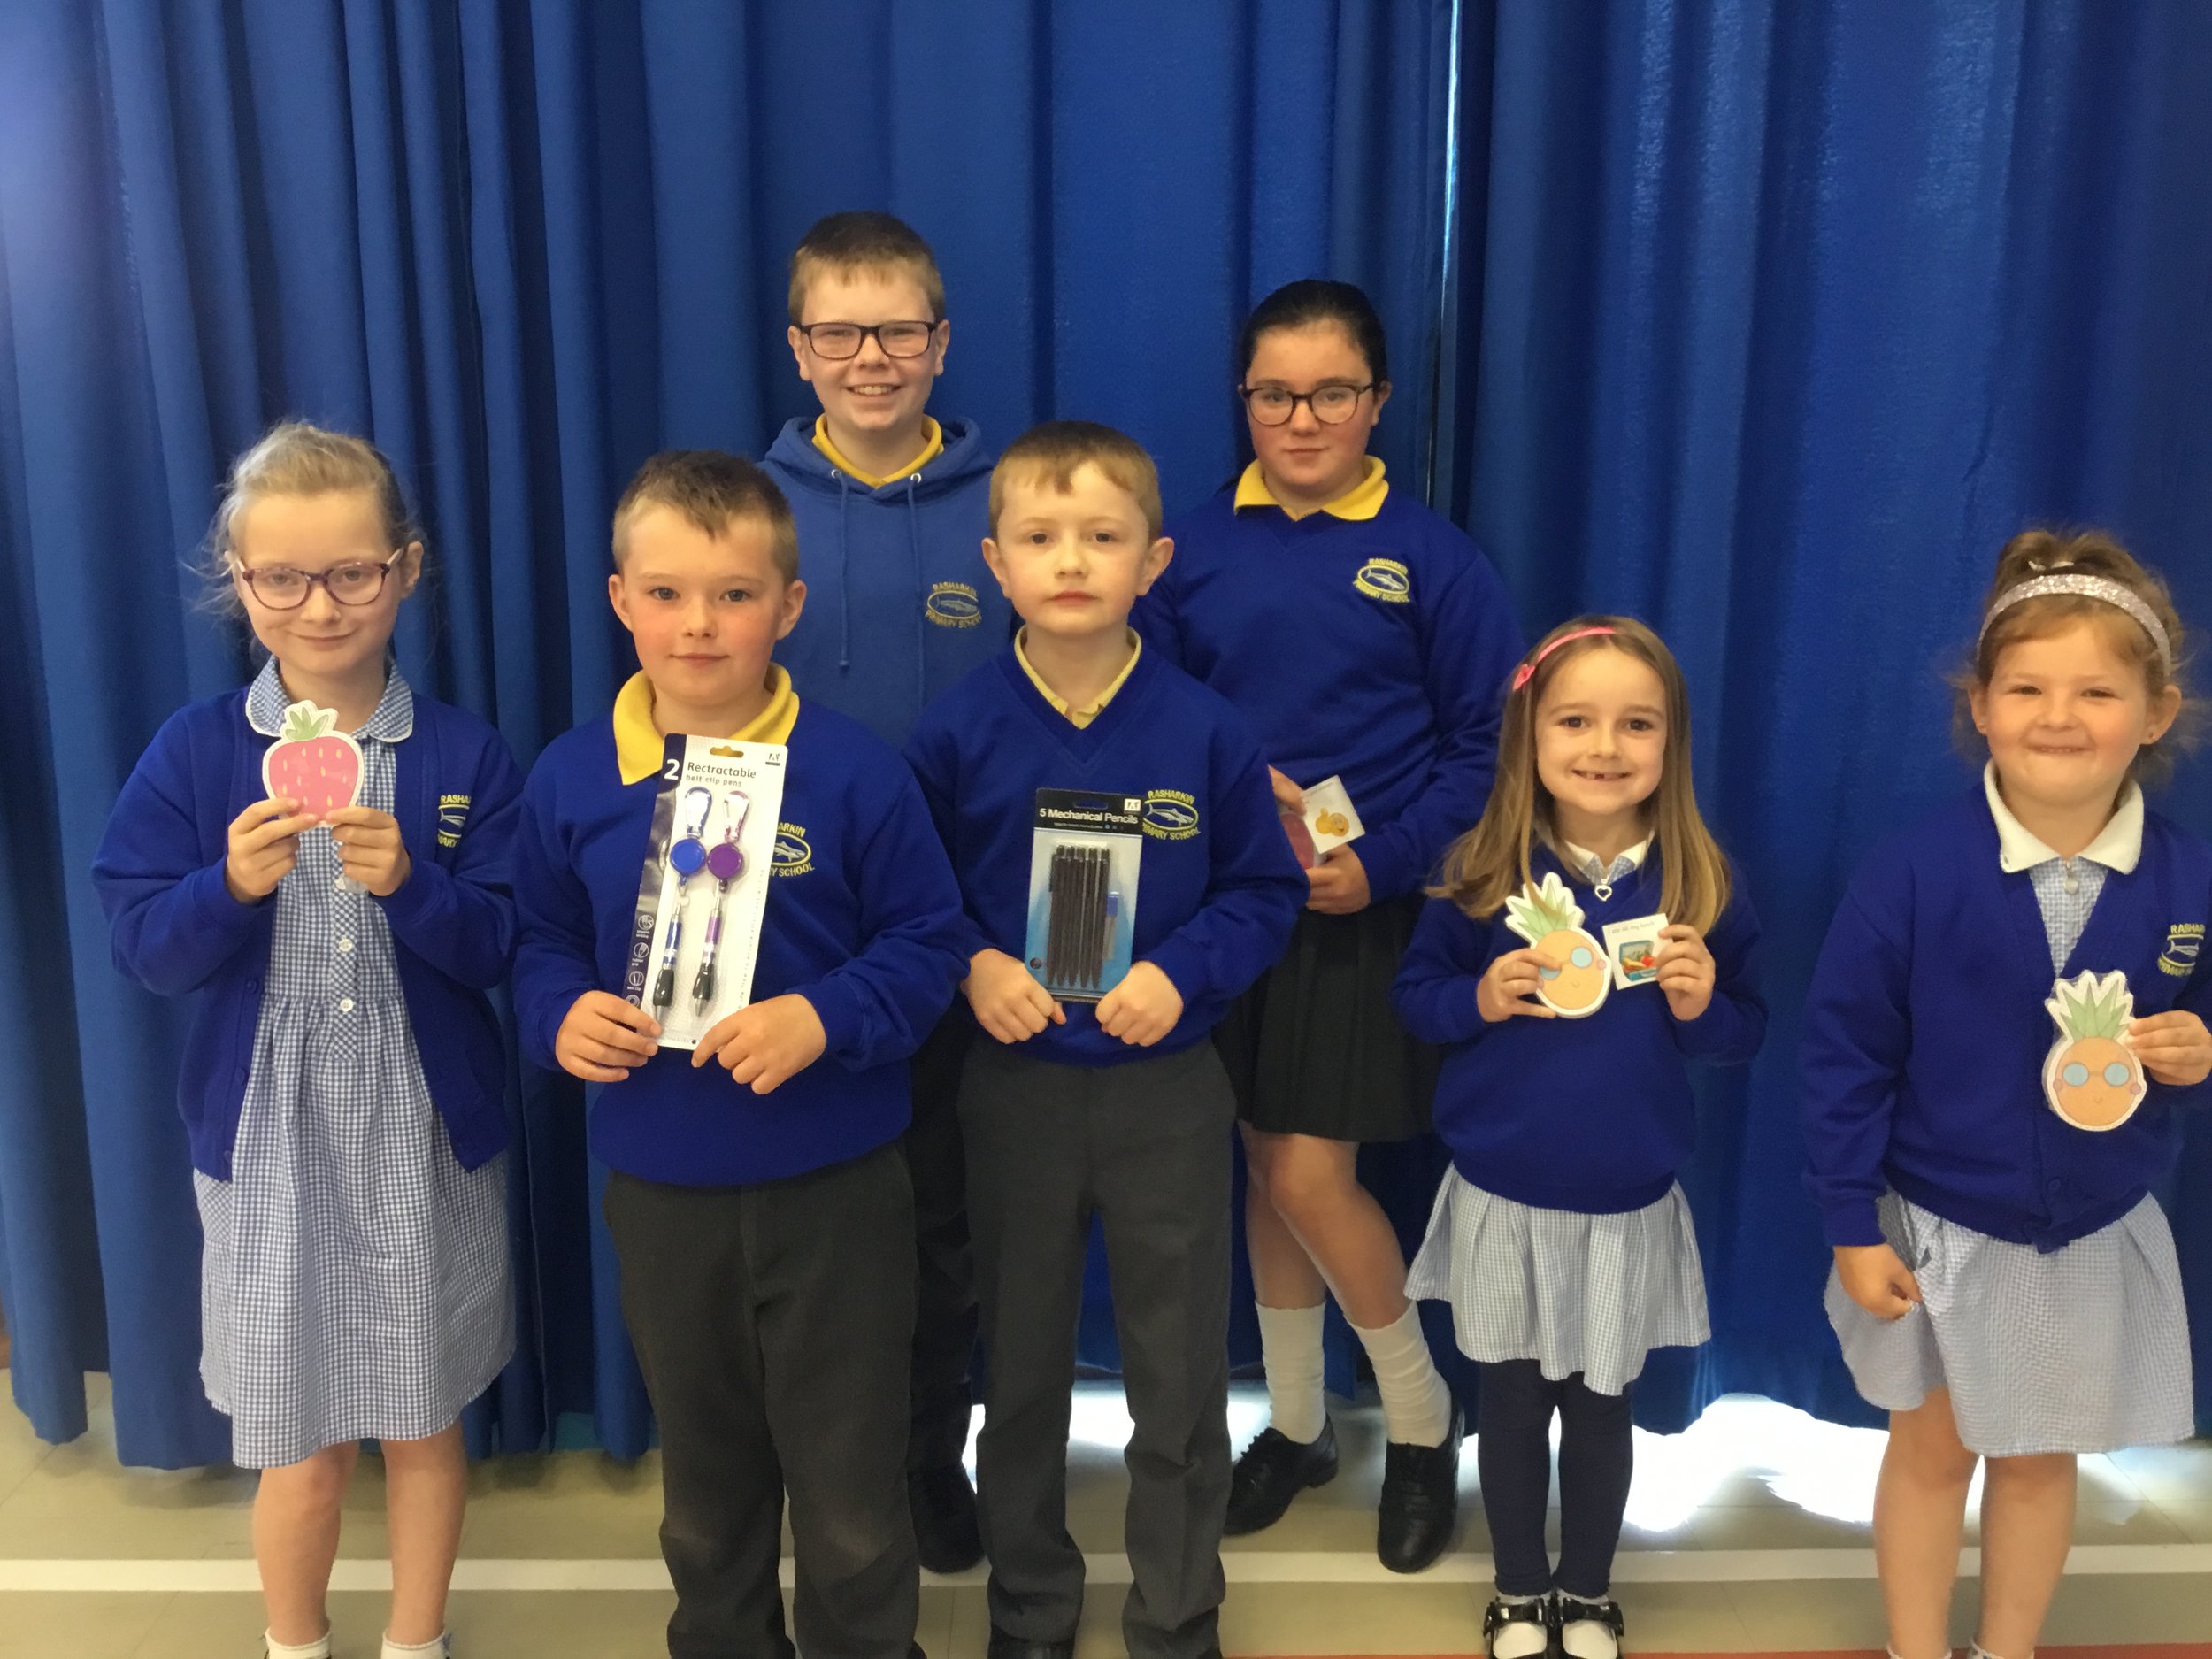 LUNCHTIME AWARD WINNERS